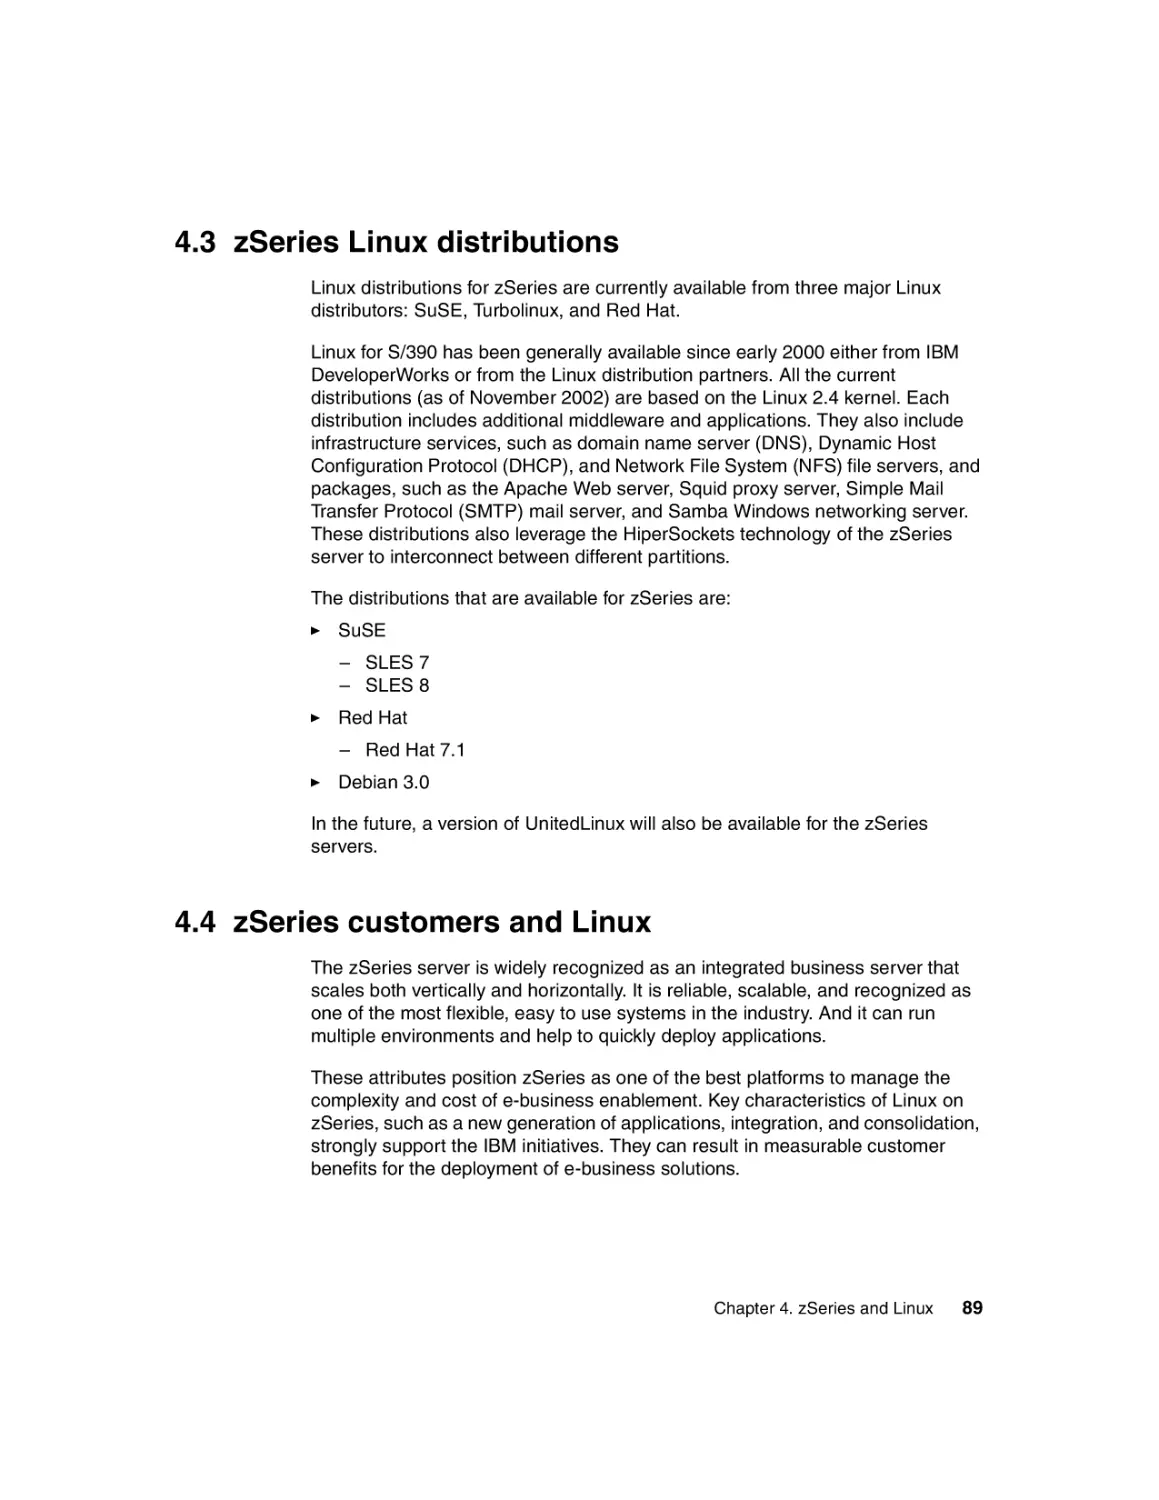 4.3 zSeries Linux distributions
4.4 zSeries customers and Linux